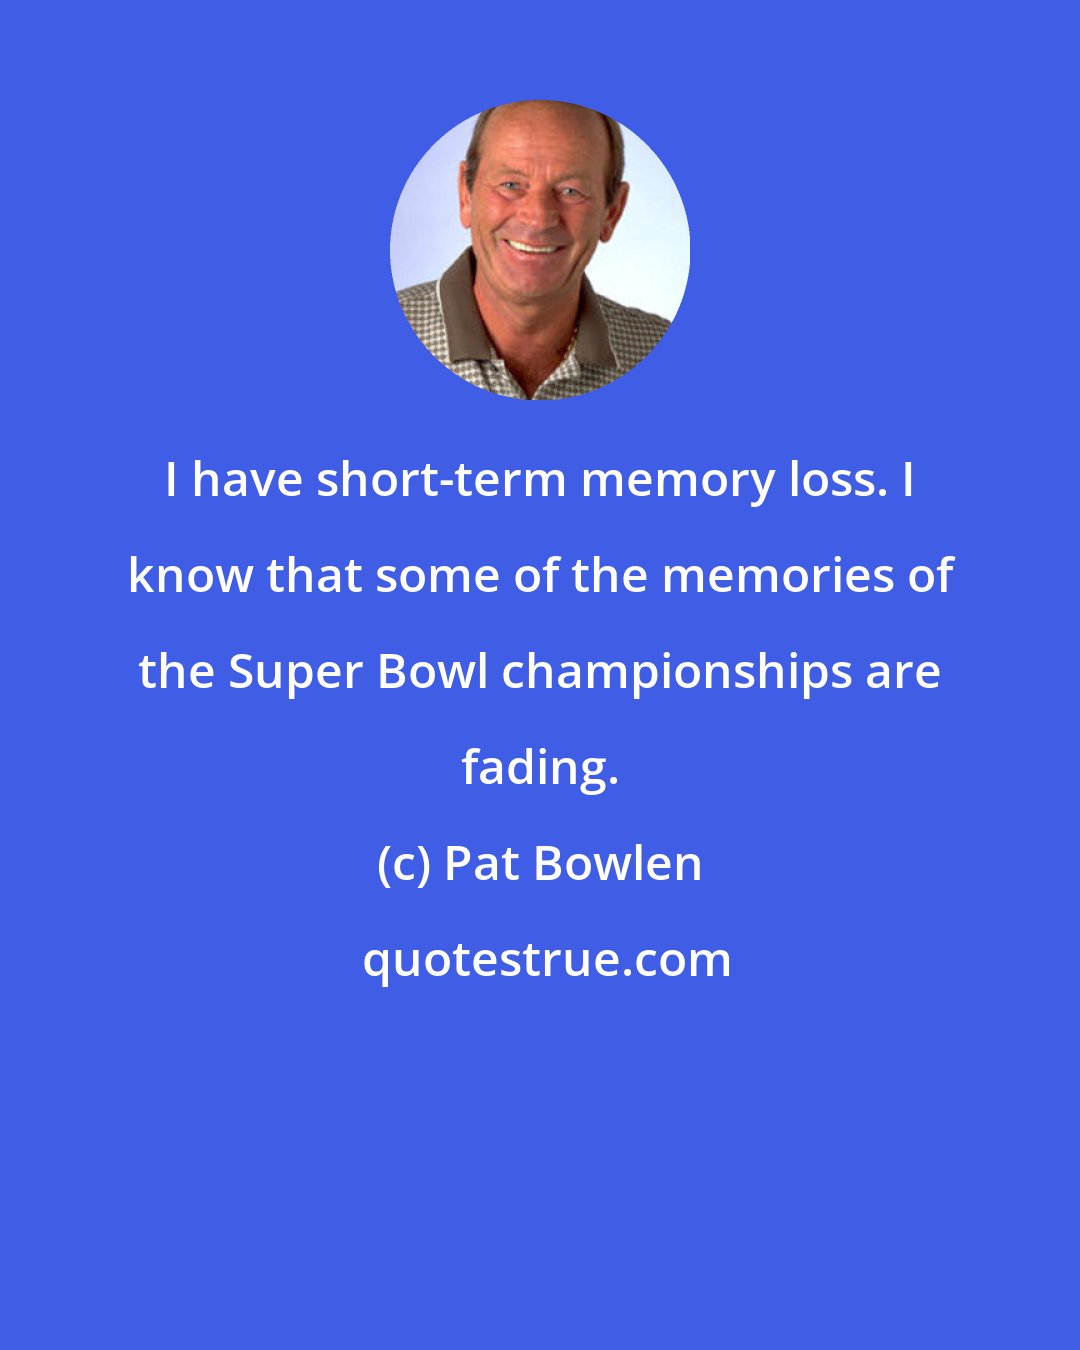 Pat Bowlen: I have short-term memory loss. I know that some of the memories of the Super Bowl championships are fading.